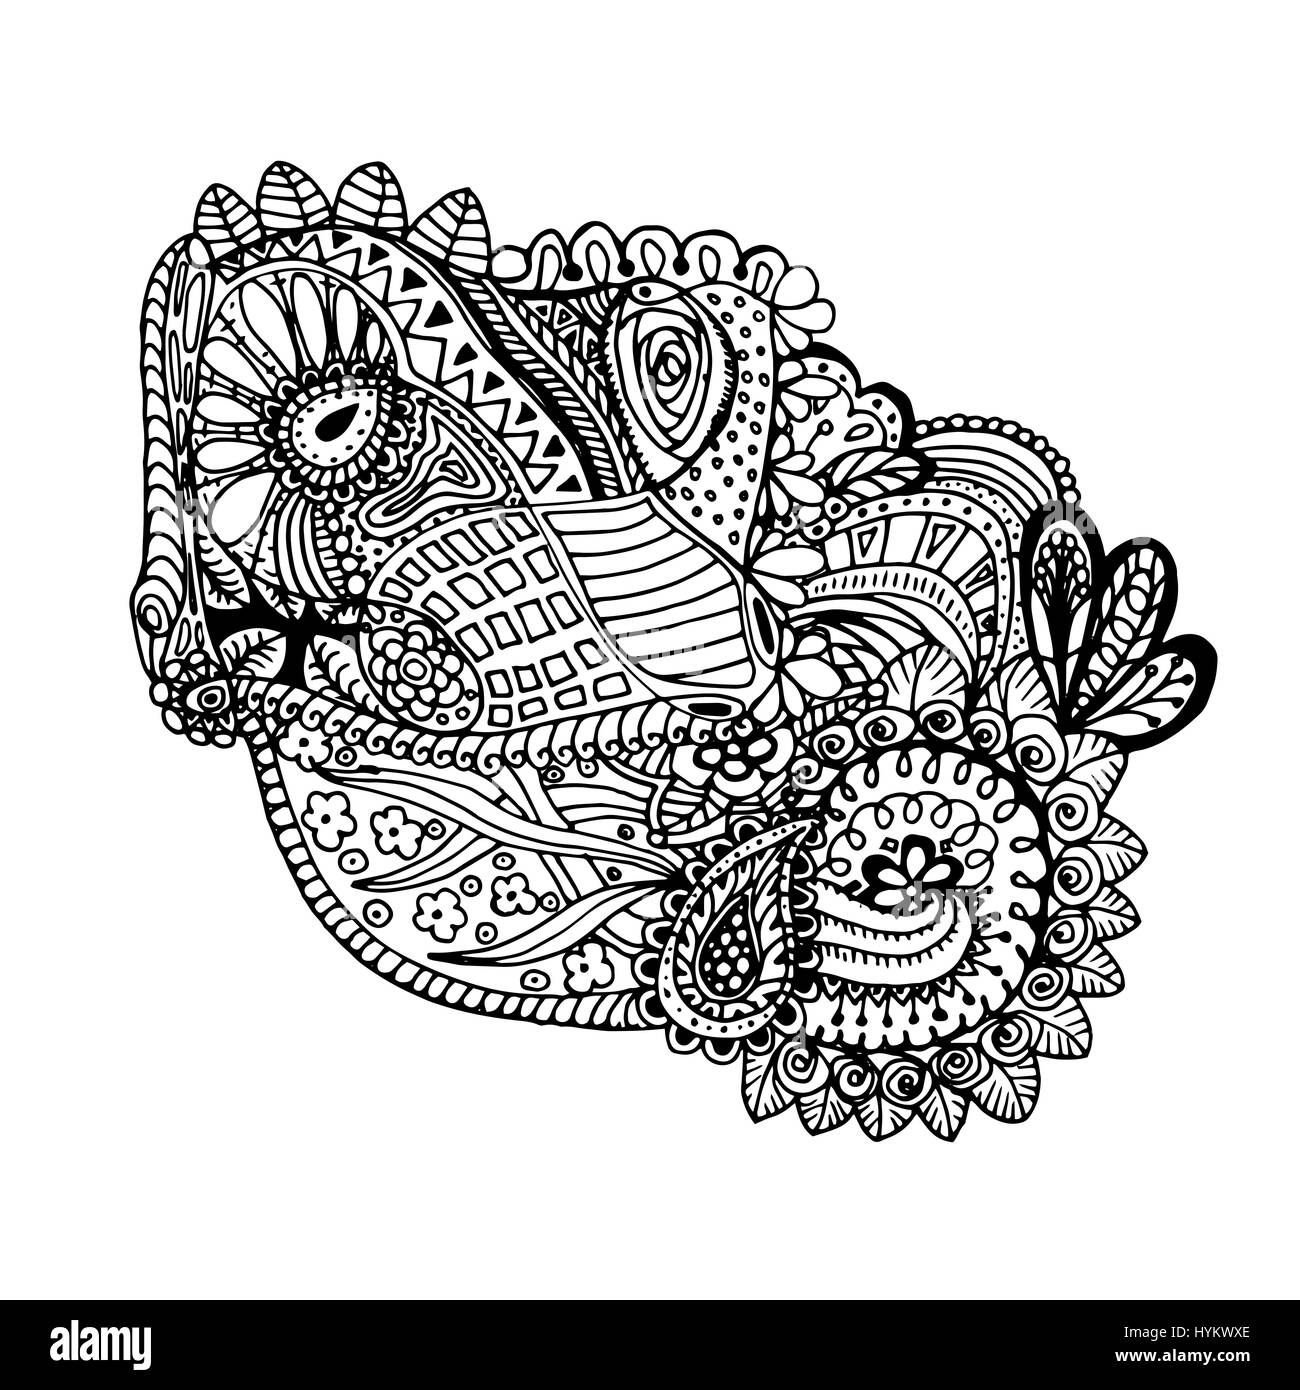 Mono color black line art element for adult coloring book page design.Floral collection. Ethnic zentangle ornament Stock Vector